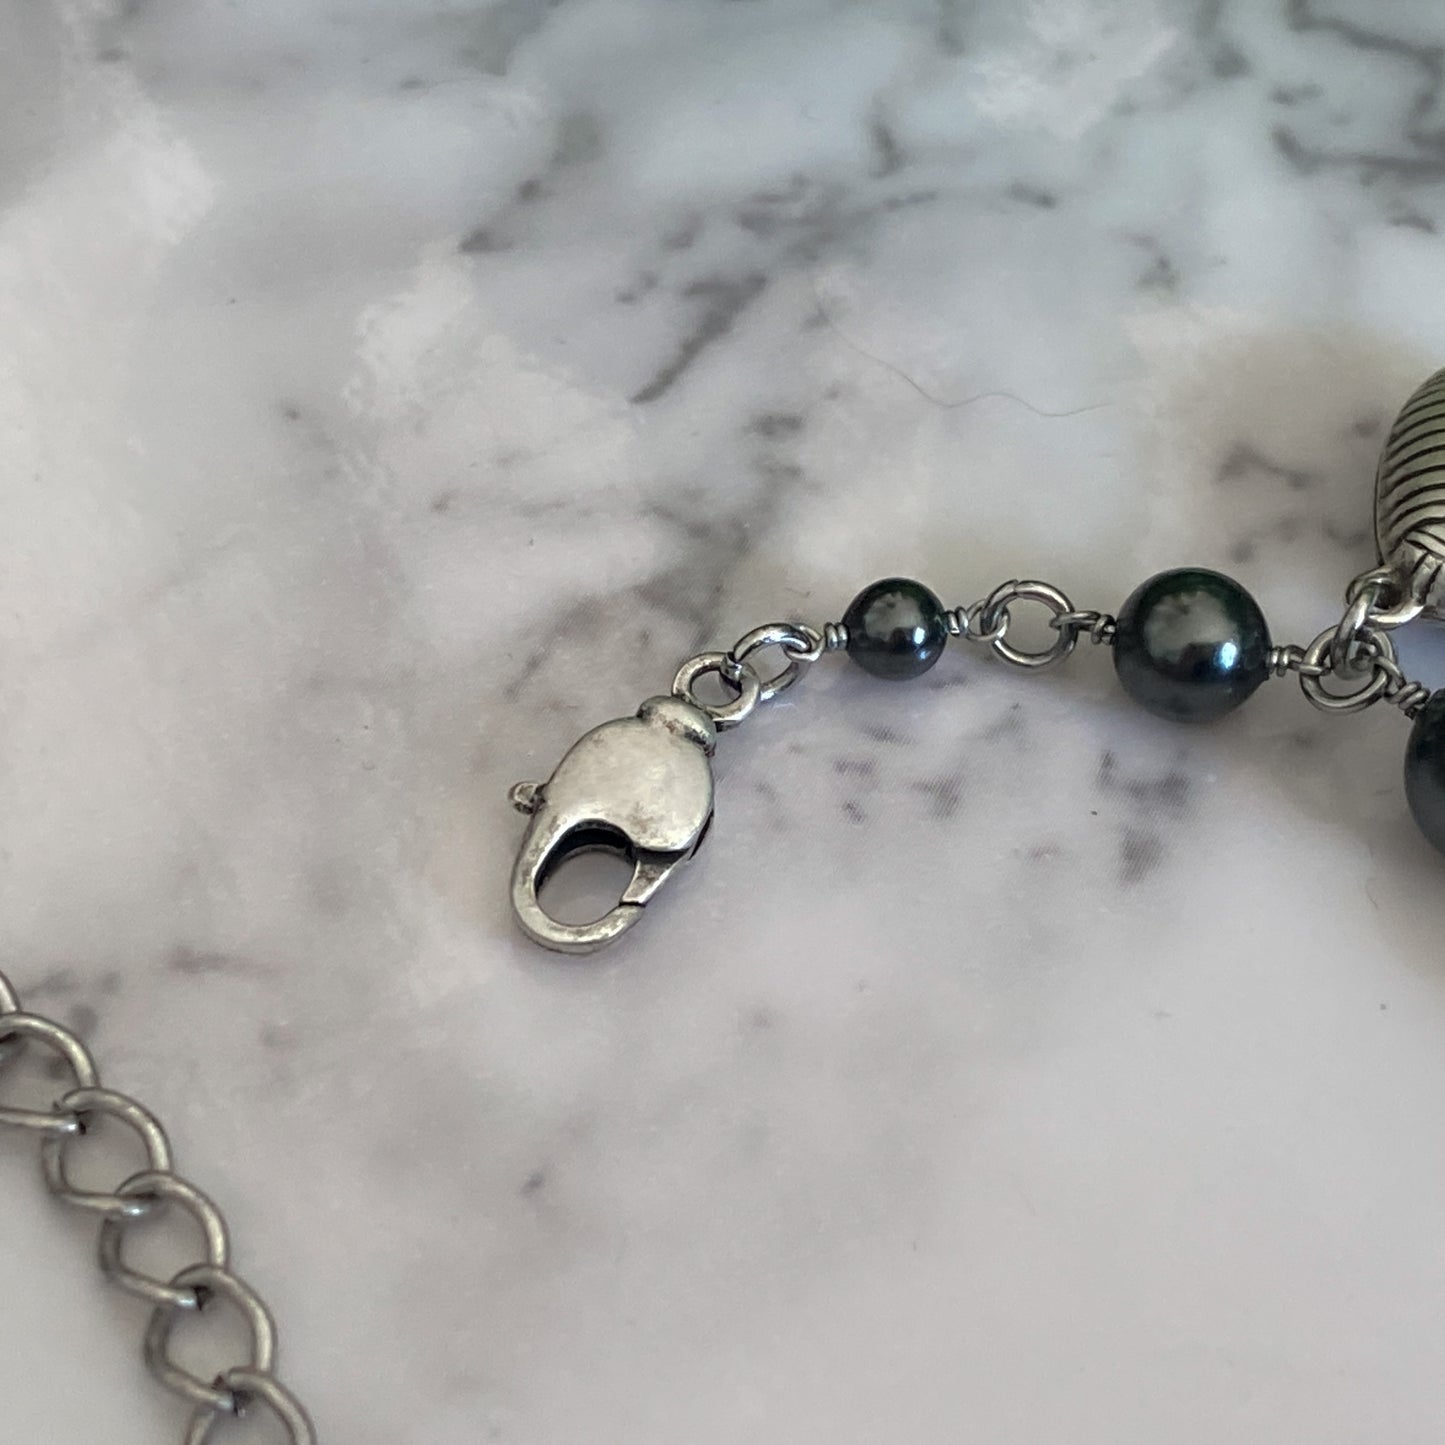 Tara ~ Dark Siren Shell Charm Choker with Glass Pearls, Antique Silver Shells and Stainless Steel